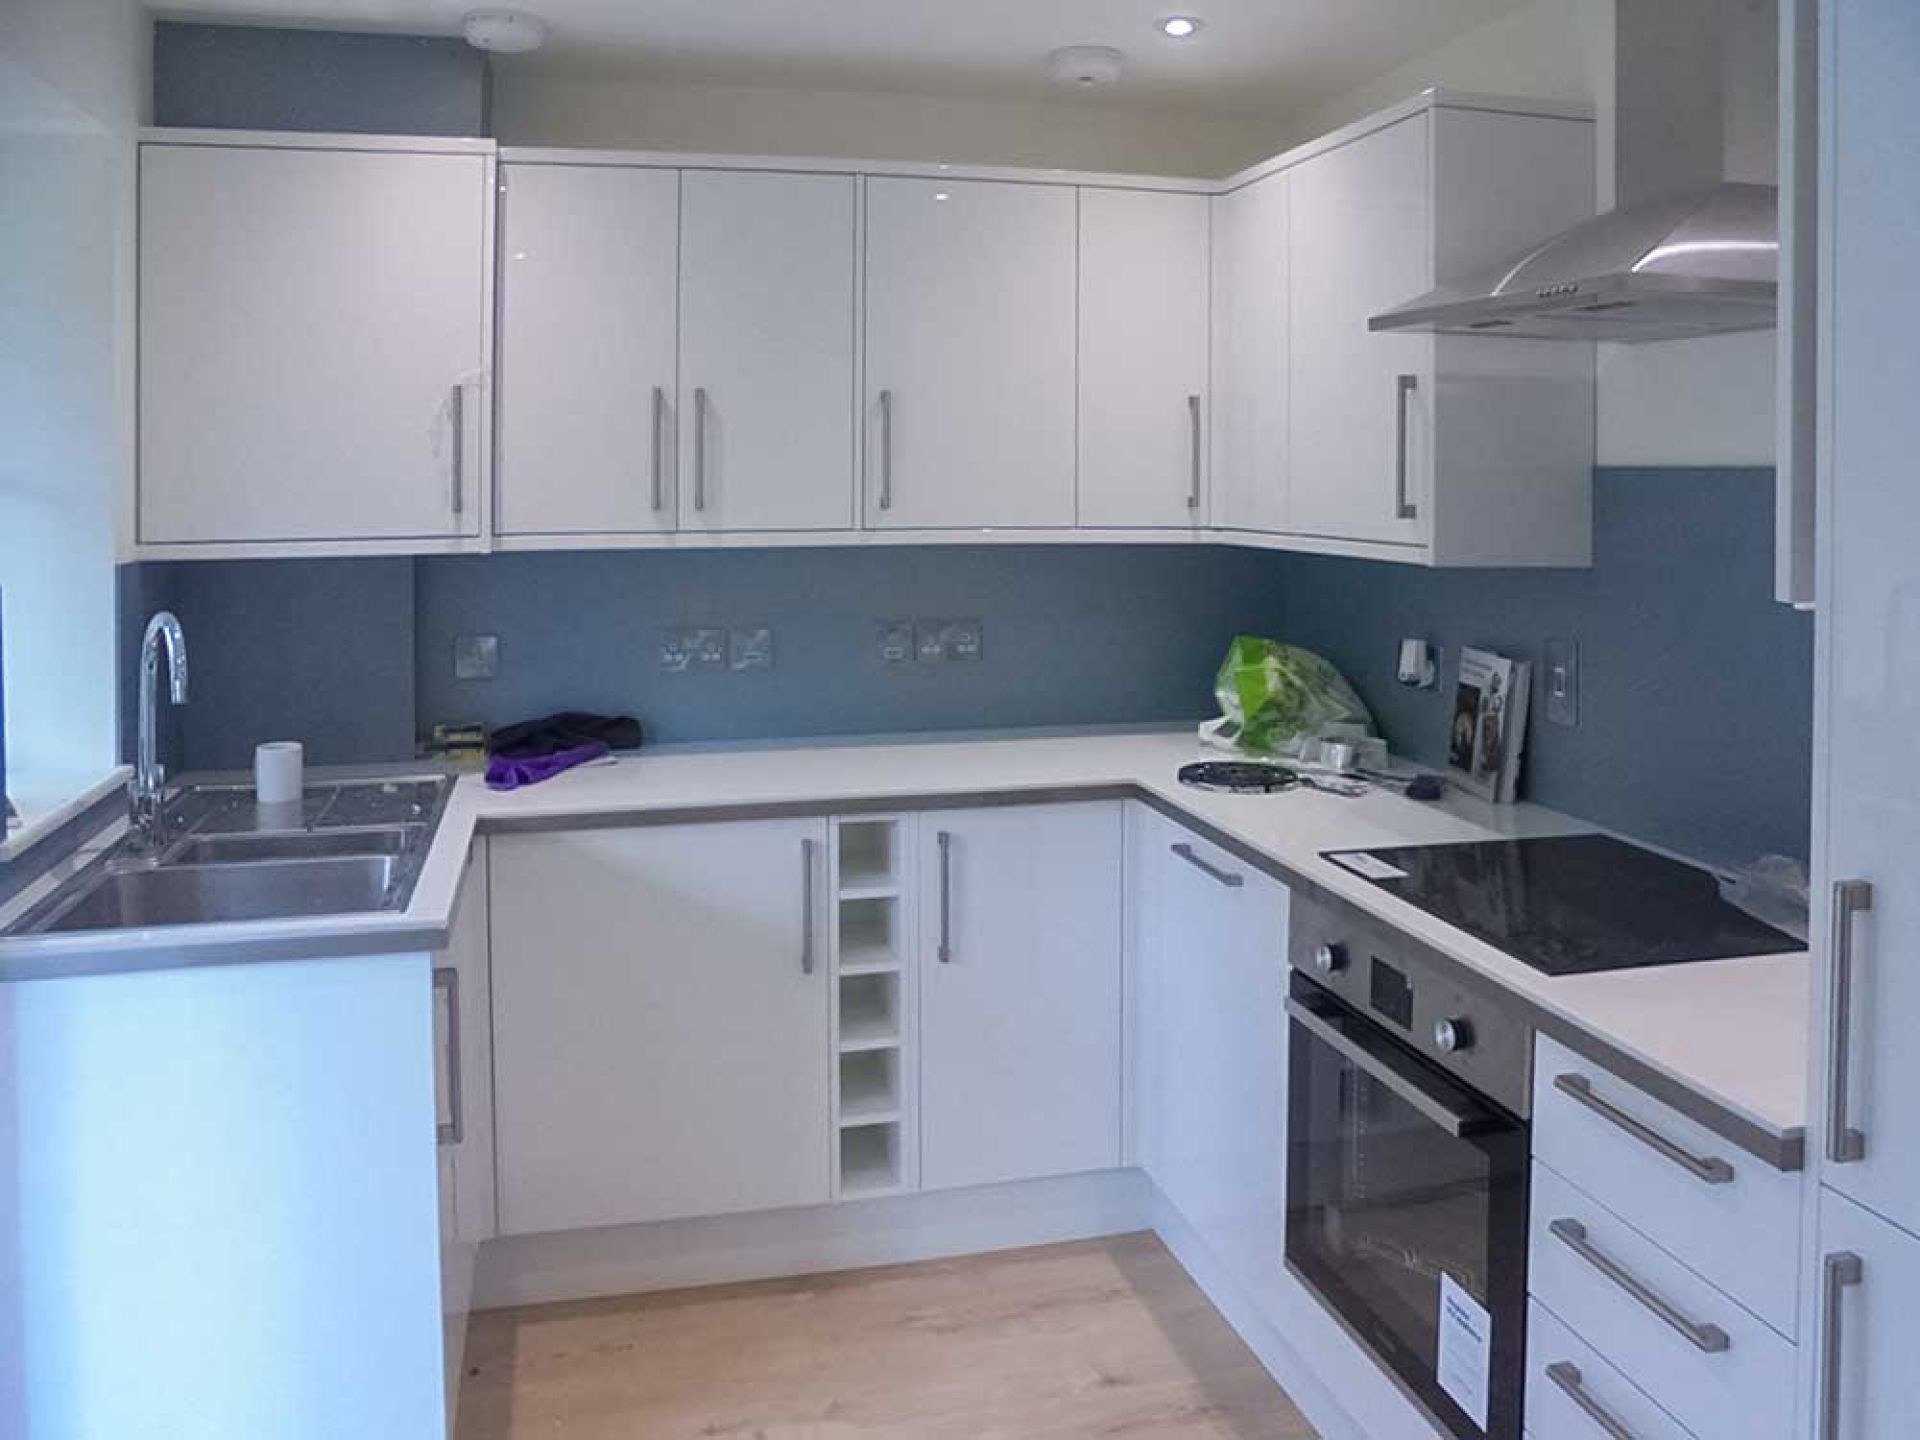 New kitchen area completed with grey blue walls and white units.